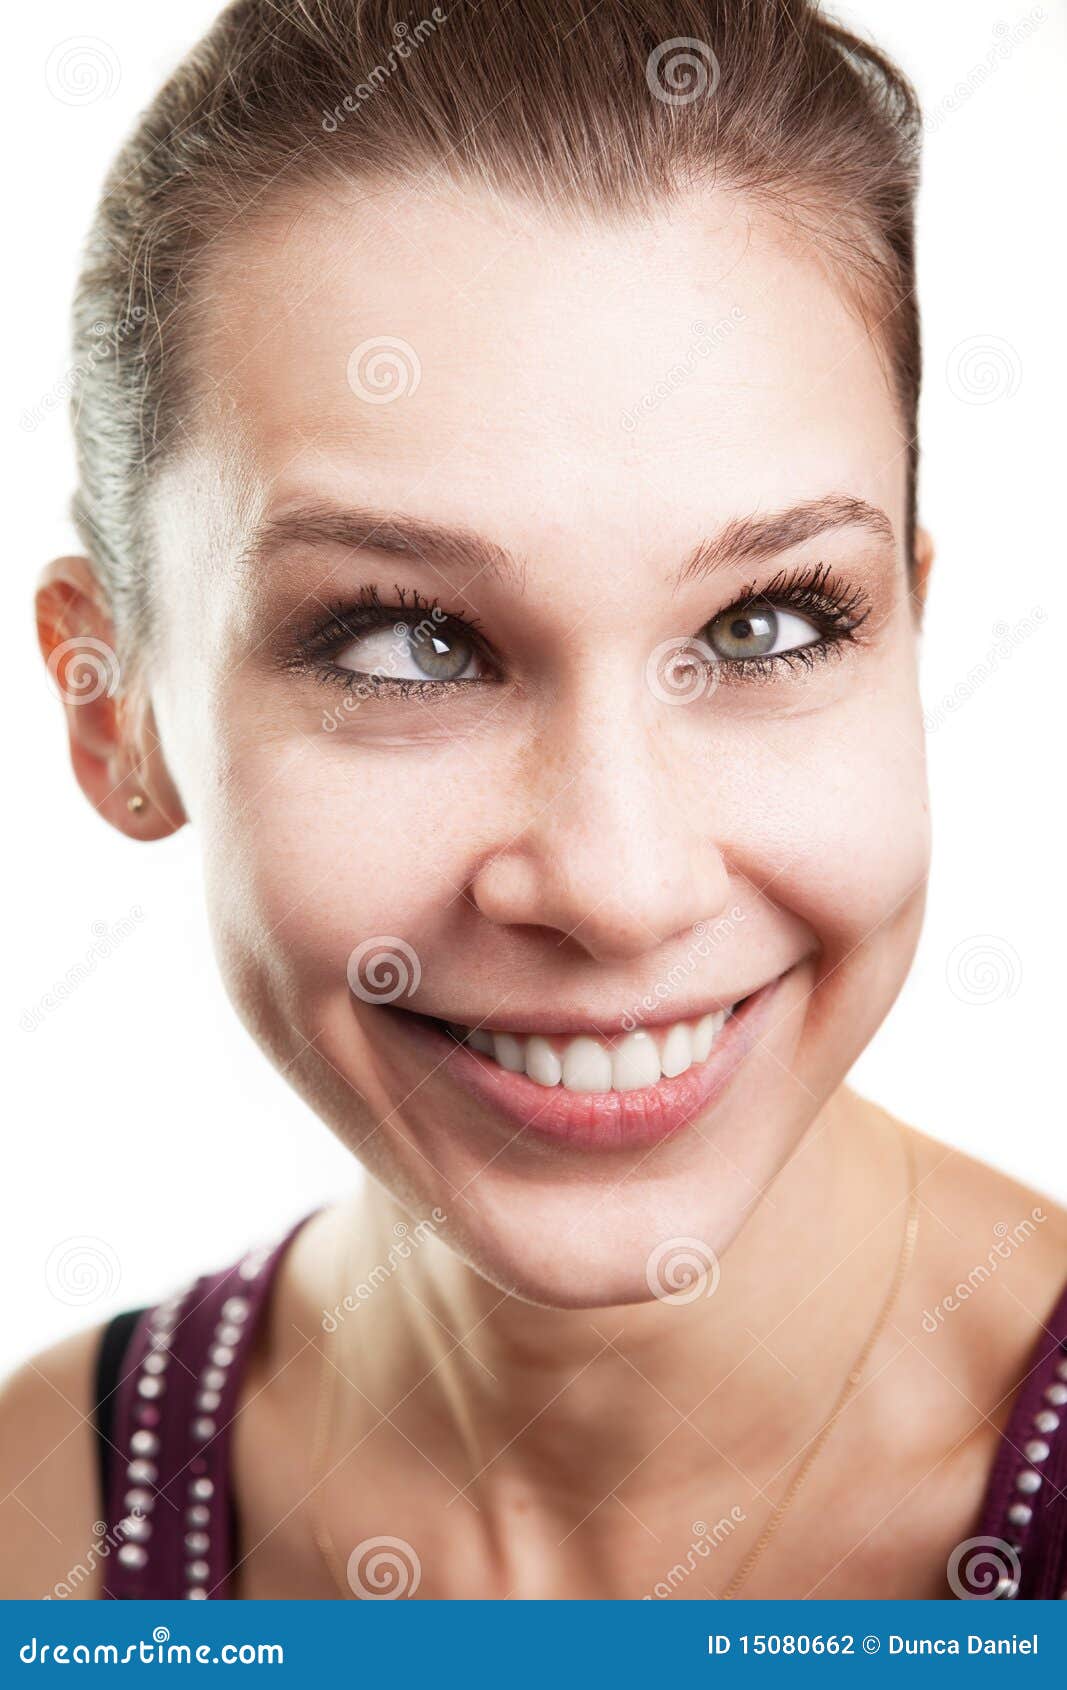 170 767 Face Funny Woman Photos Free Royalty Free Stock Photos From Dreamstime